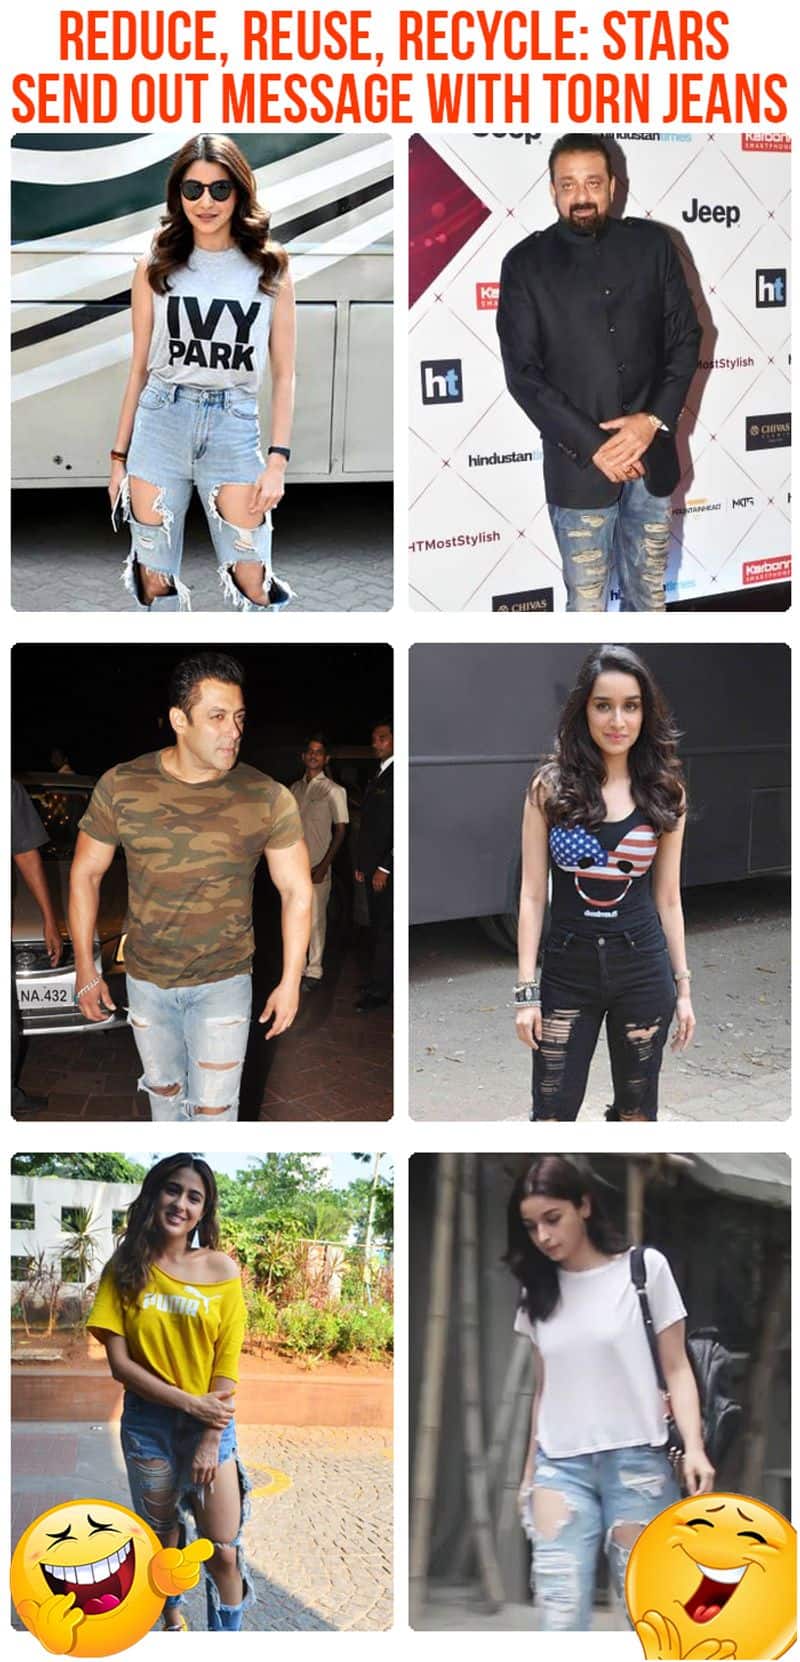 Jeans are probably the most popular choice of anyone when it comes to opting for clothes. Many cuts and shapes have made this type of clothing acceptable to wear on different types of occasions.   While a certain section of society might not concur, the majority of people have sort of agreed to just keep it casual.